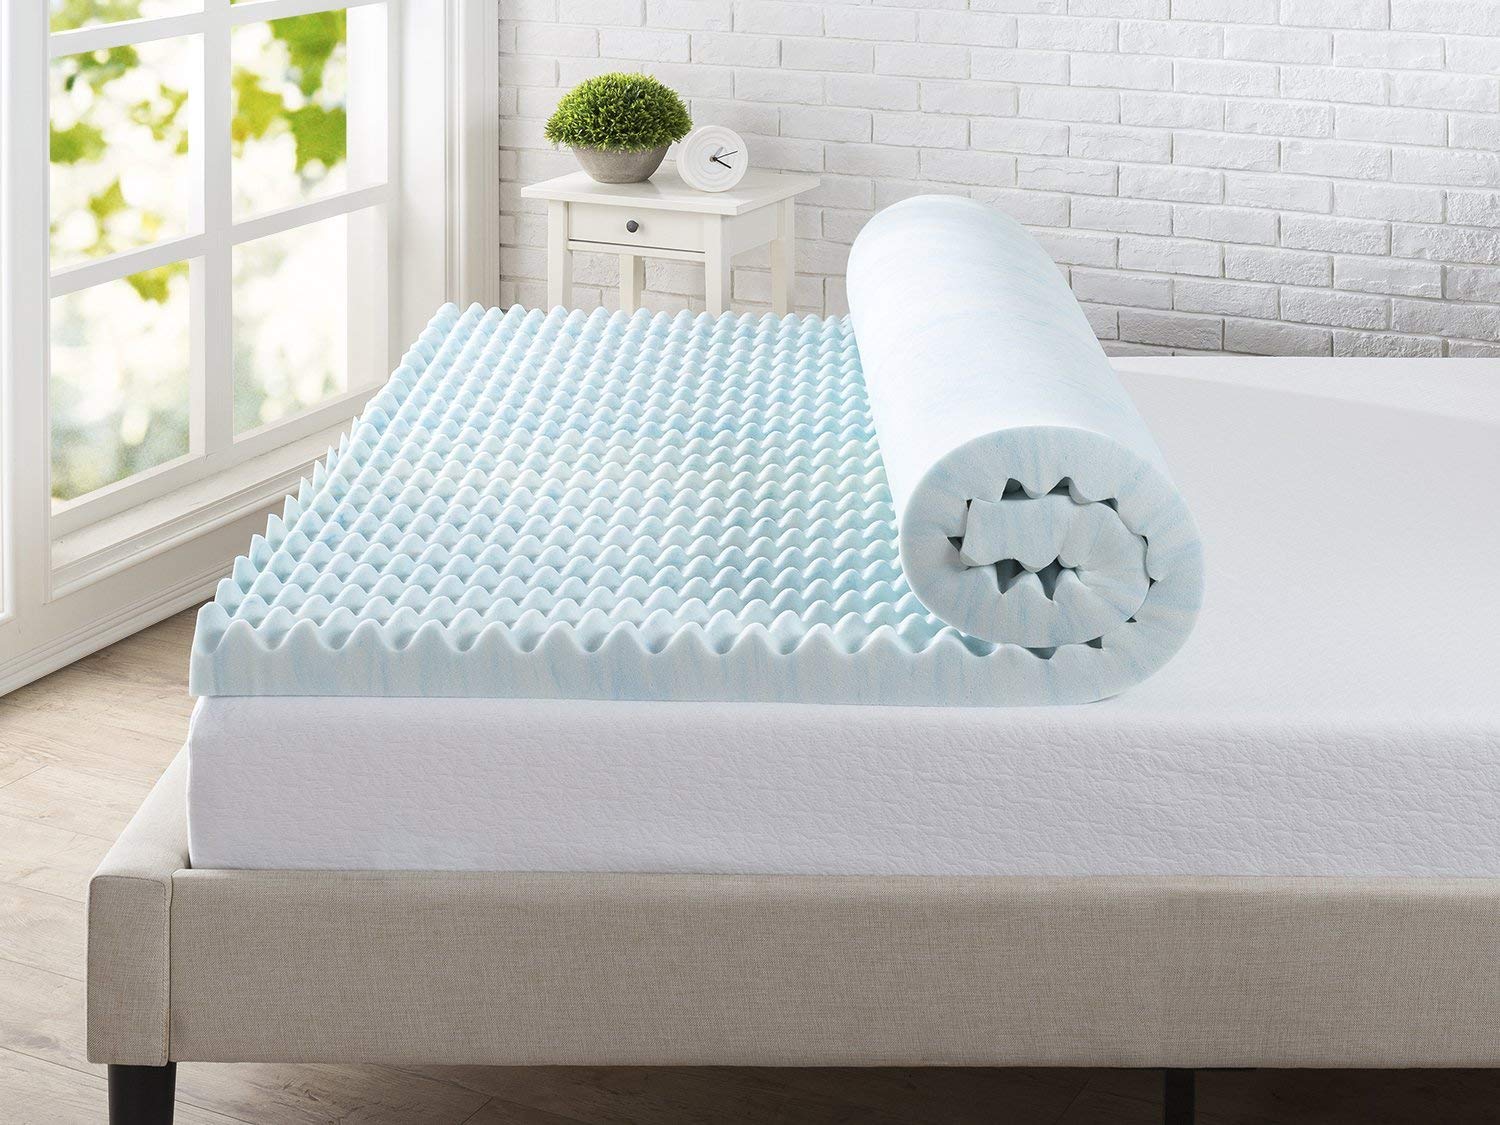 firm mattress topper for bad back